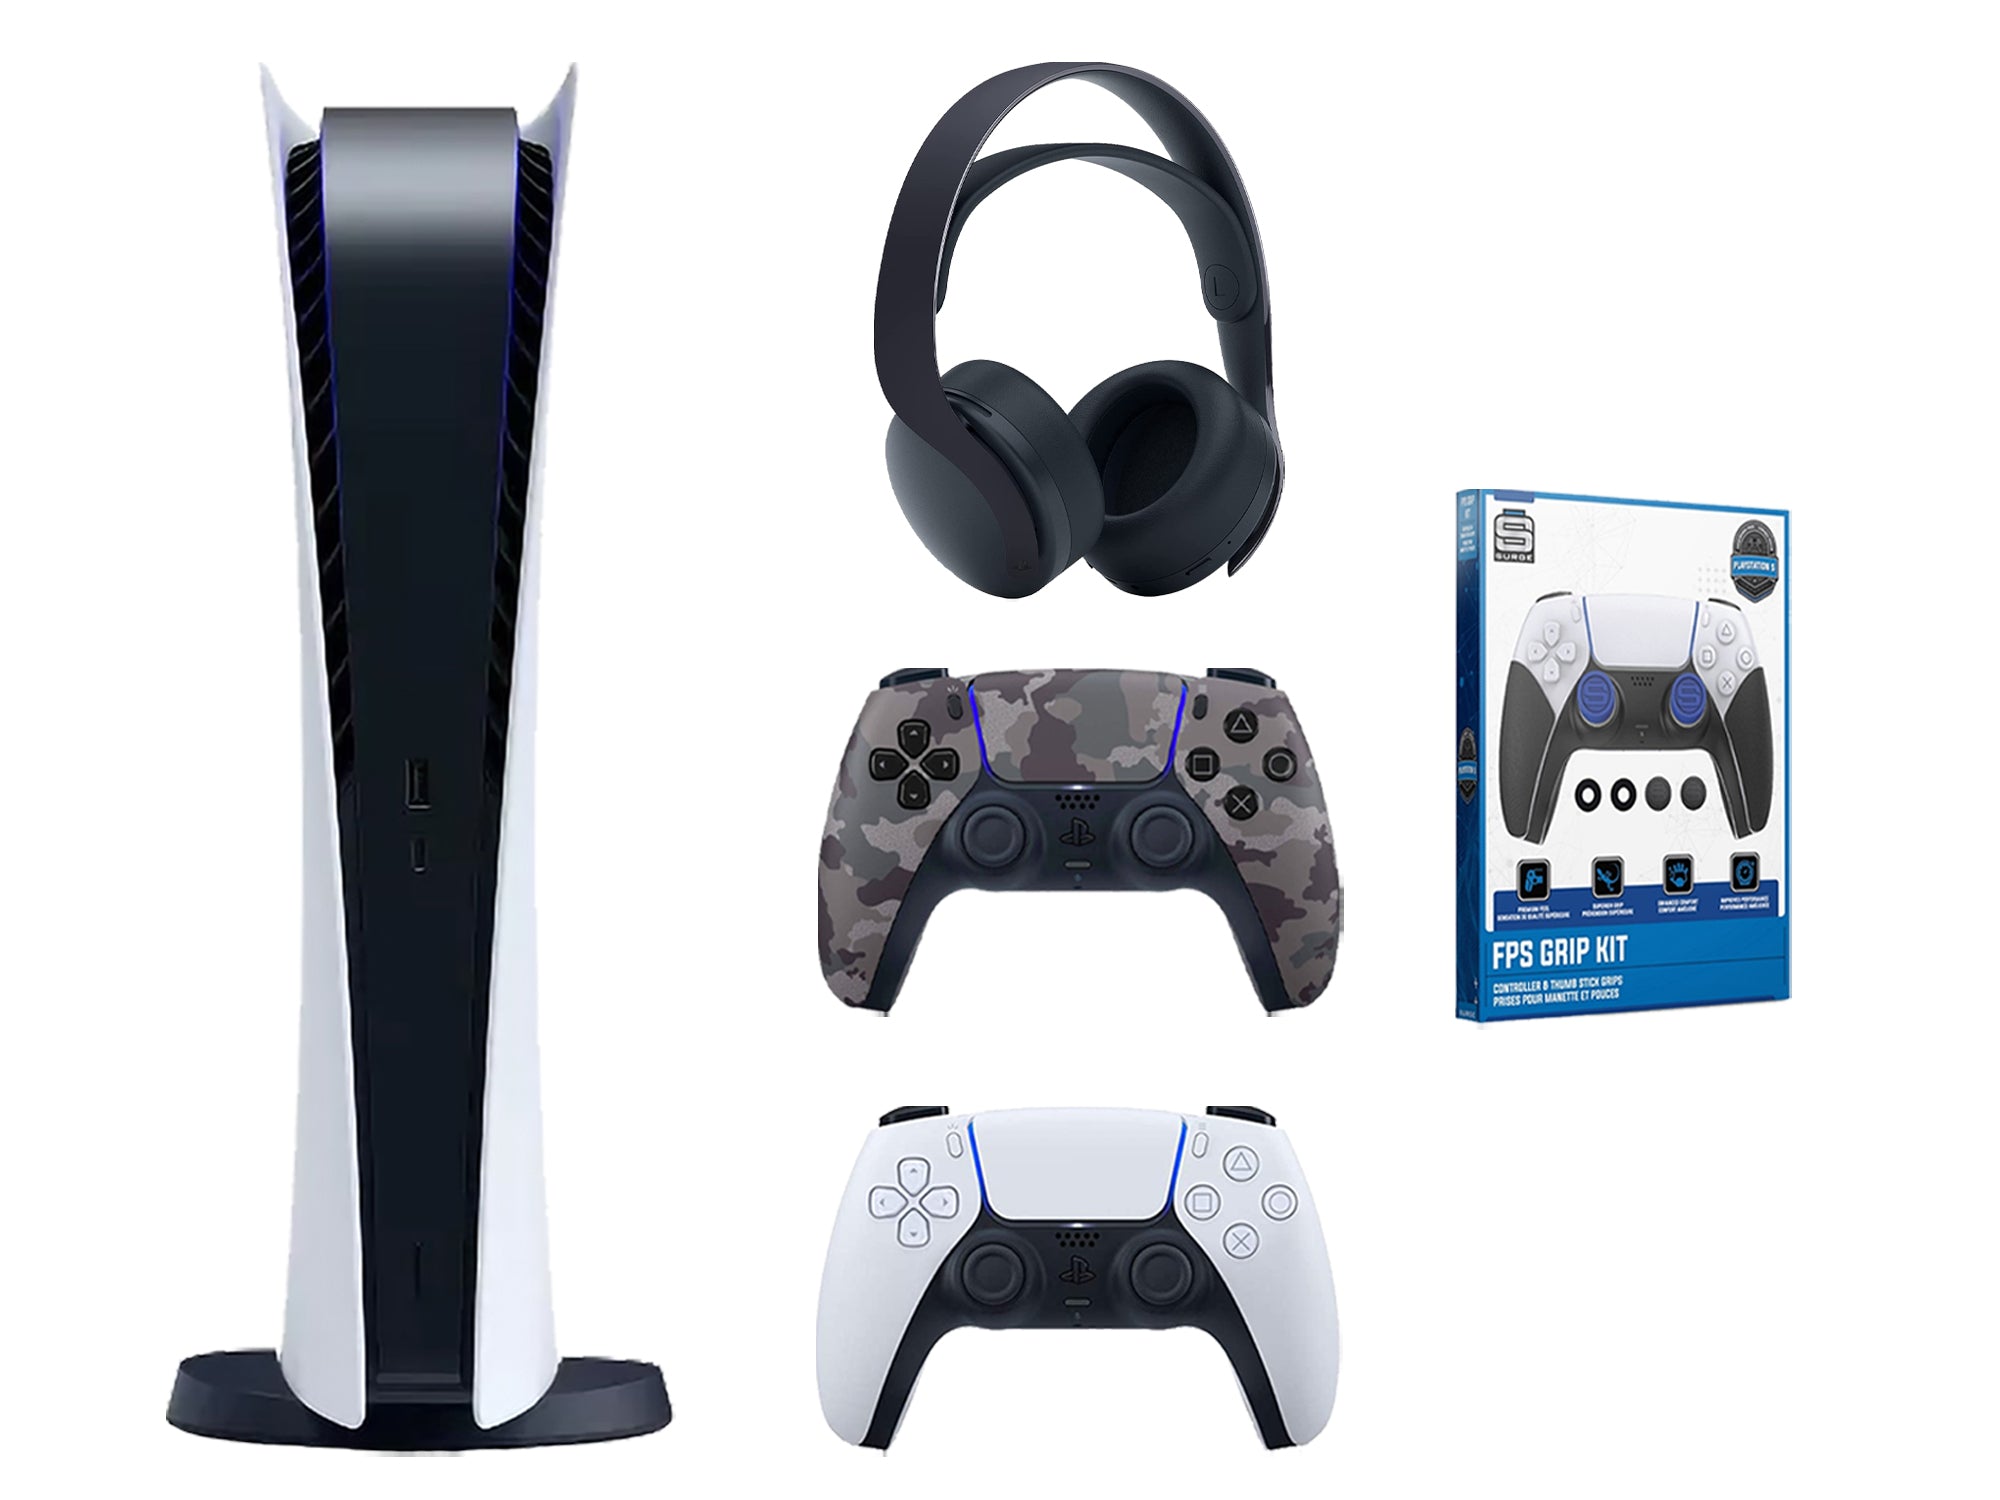 Sony Playstation 5 Digital Edition Bundle with Extra Gray Camo Controller, Black PULSE 3D Wireless Headset and FPS Grip Kit - Pro-Distributing